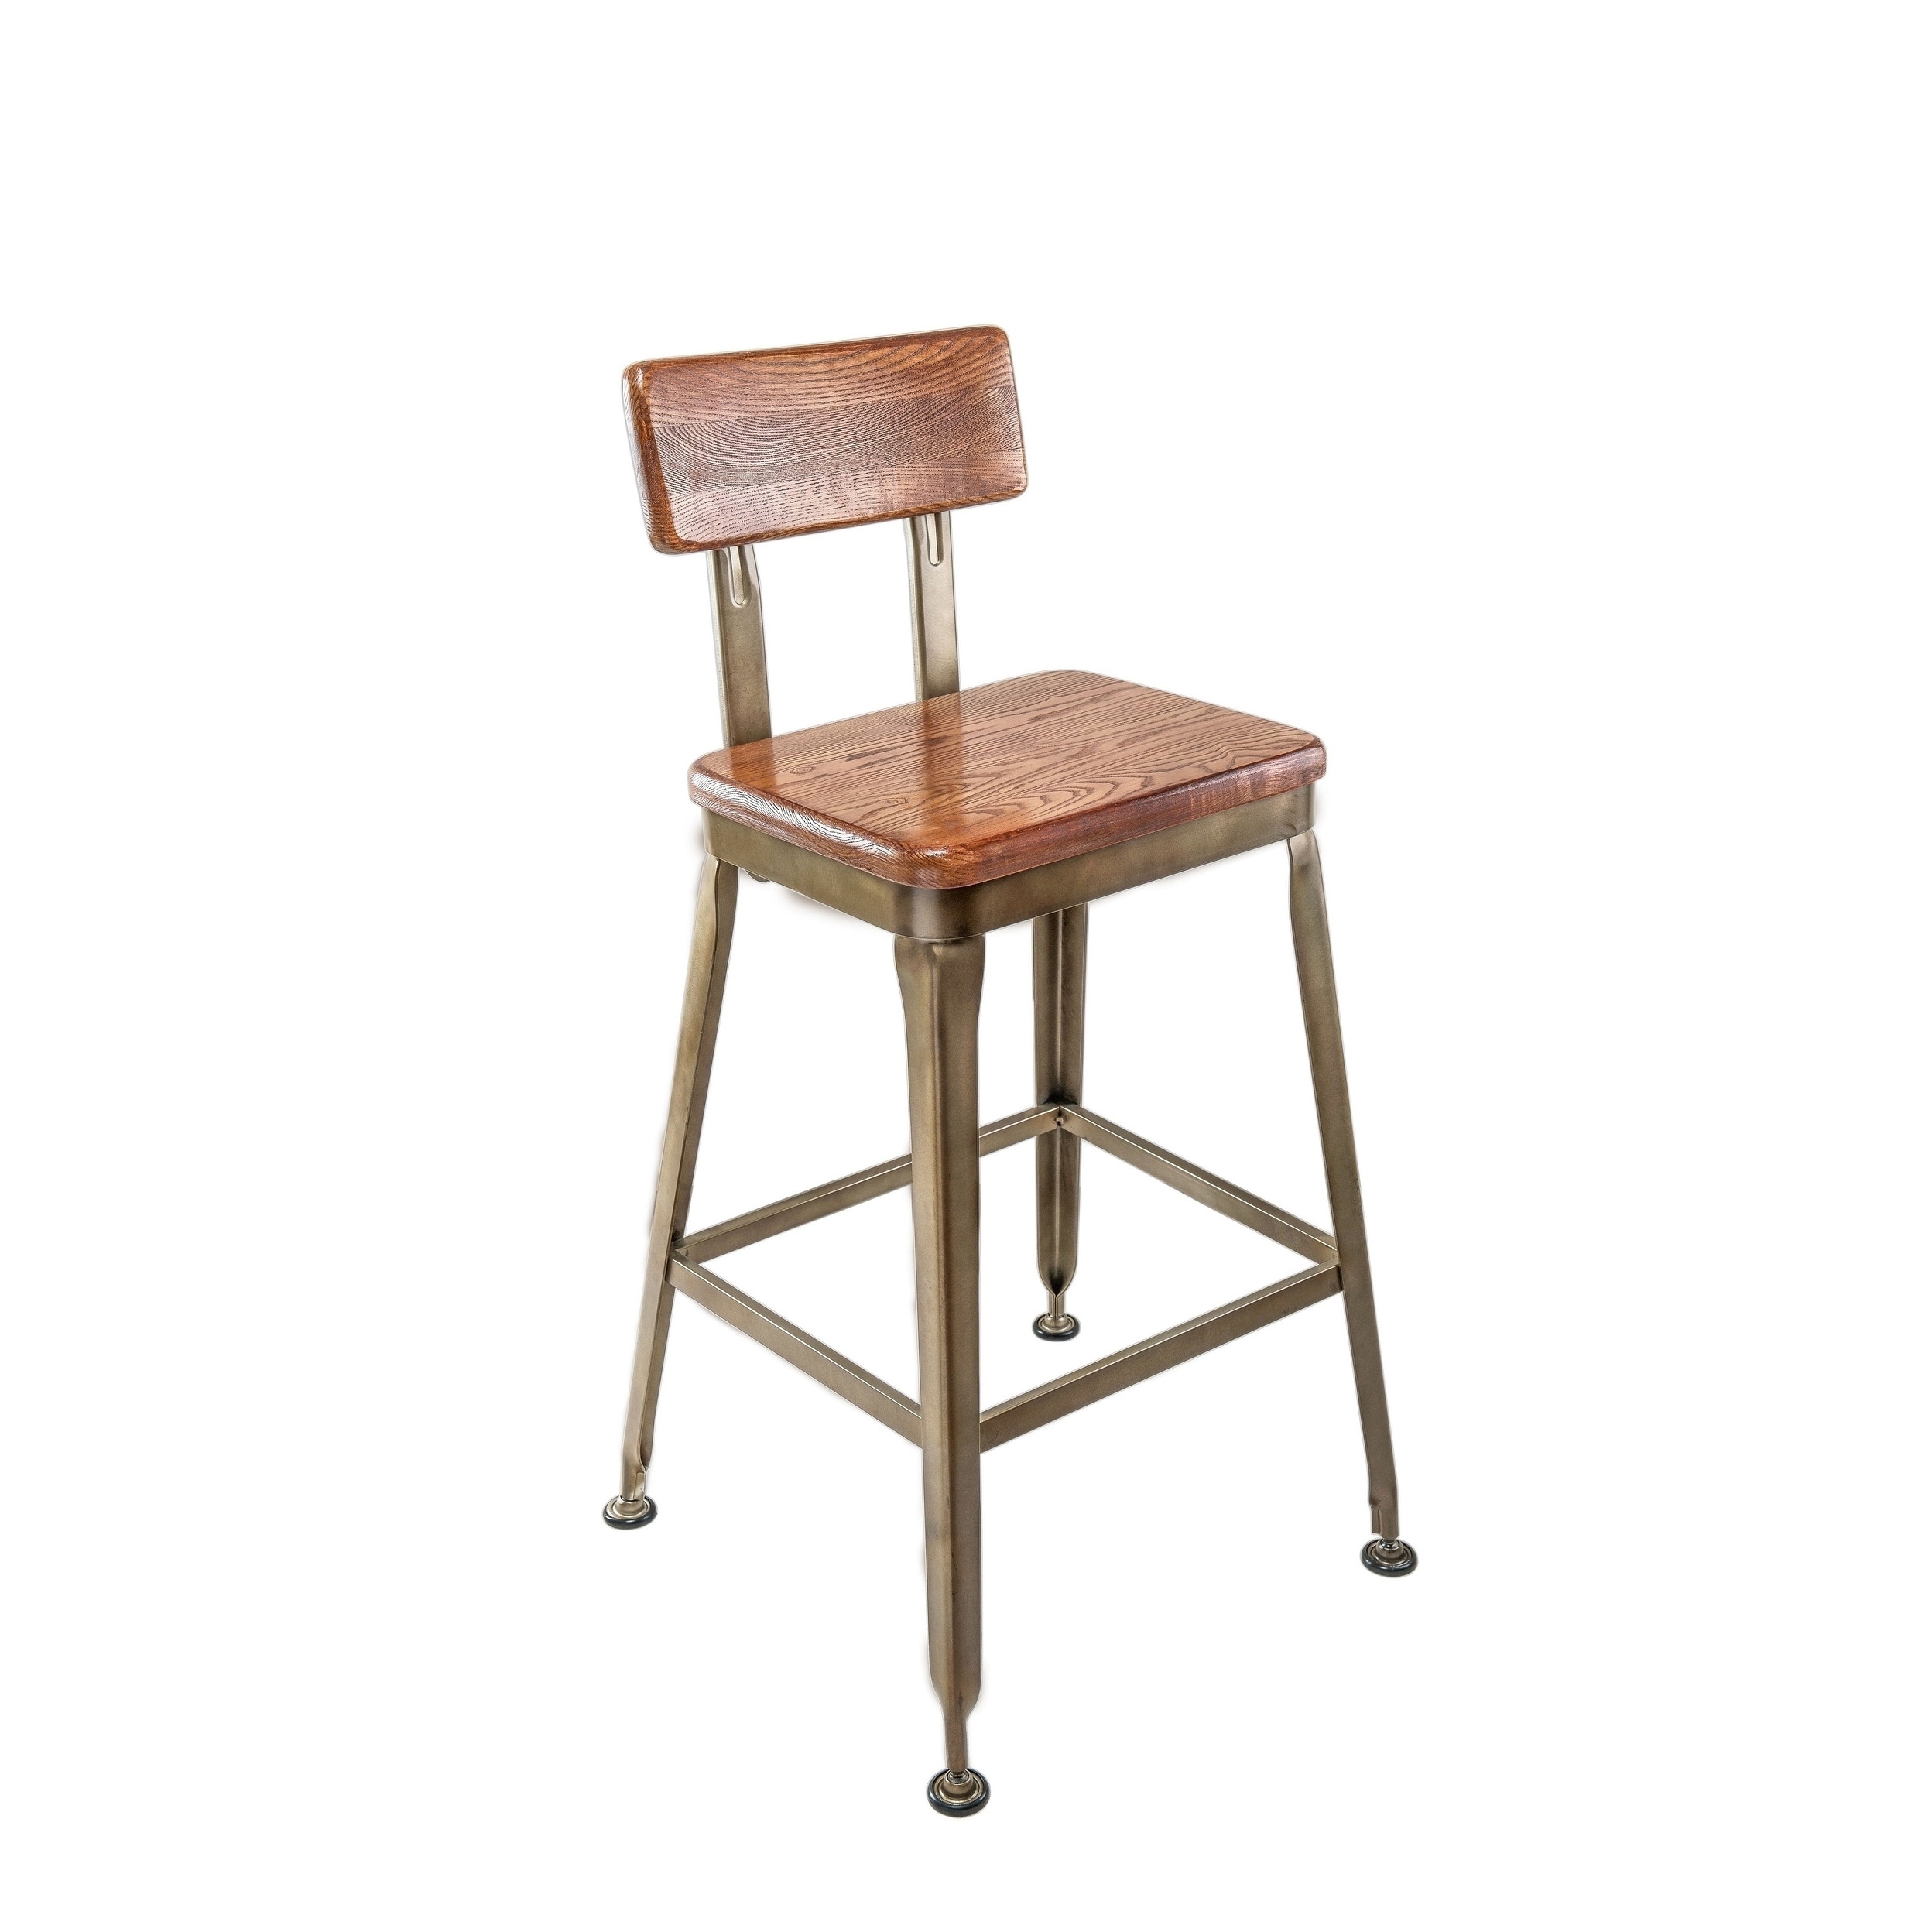 Walnut decor Brocha bar Stool, 30 seat height and Solid Metal frame with solid wood.